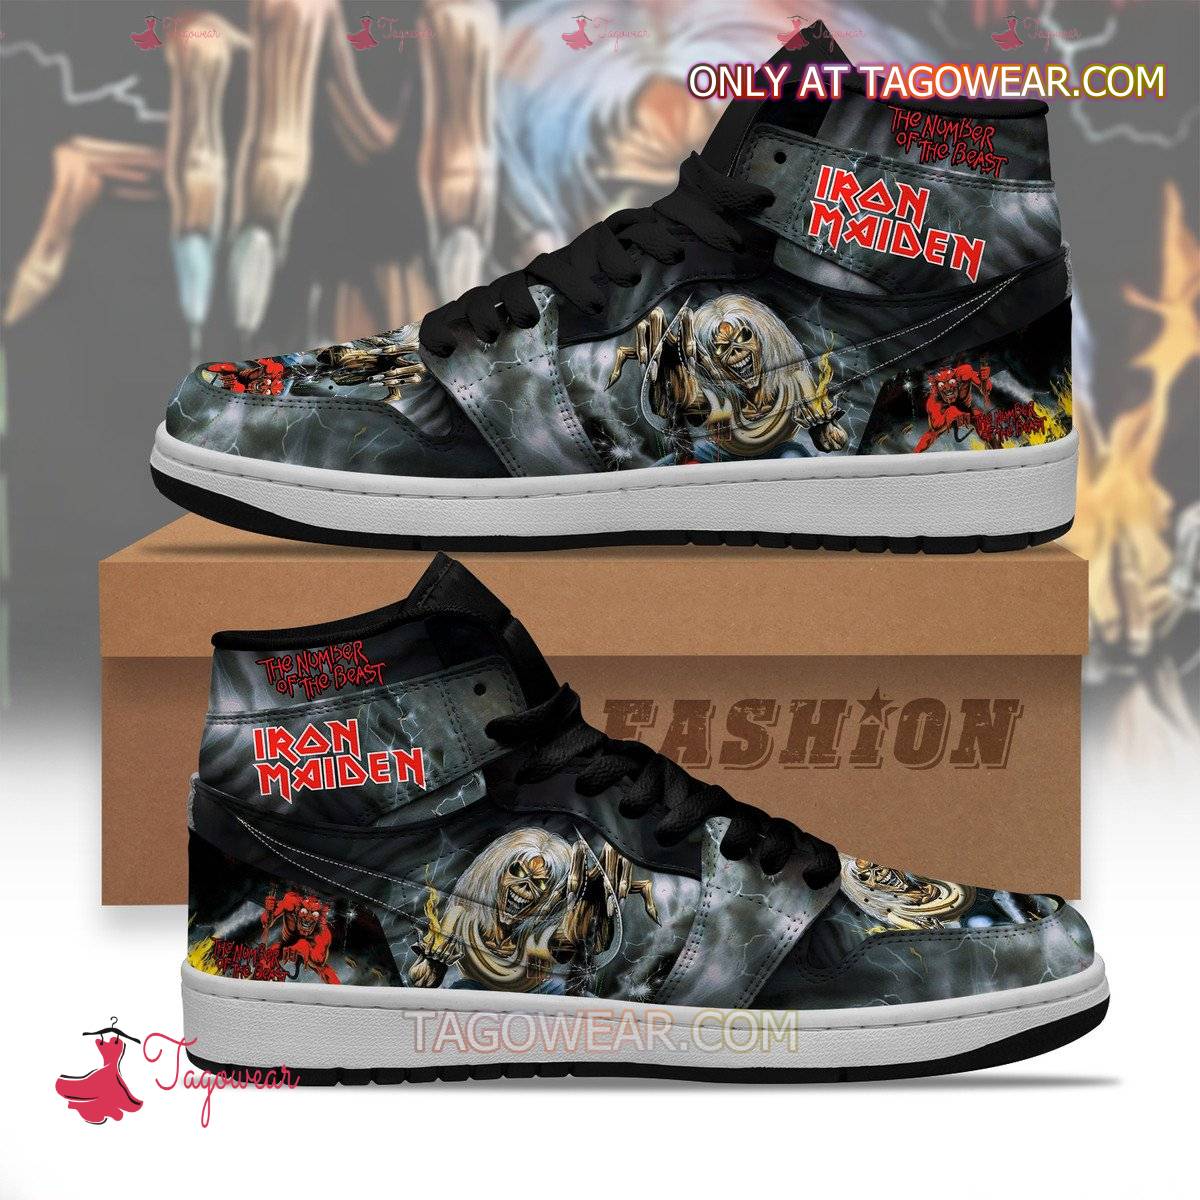 Iron Maiden The Number Of The Beast Air Jordan High Top Shoes